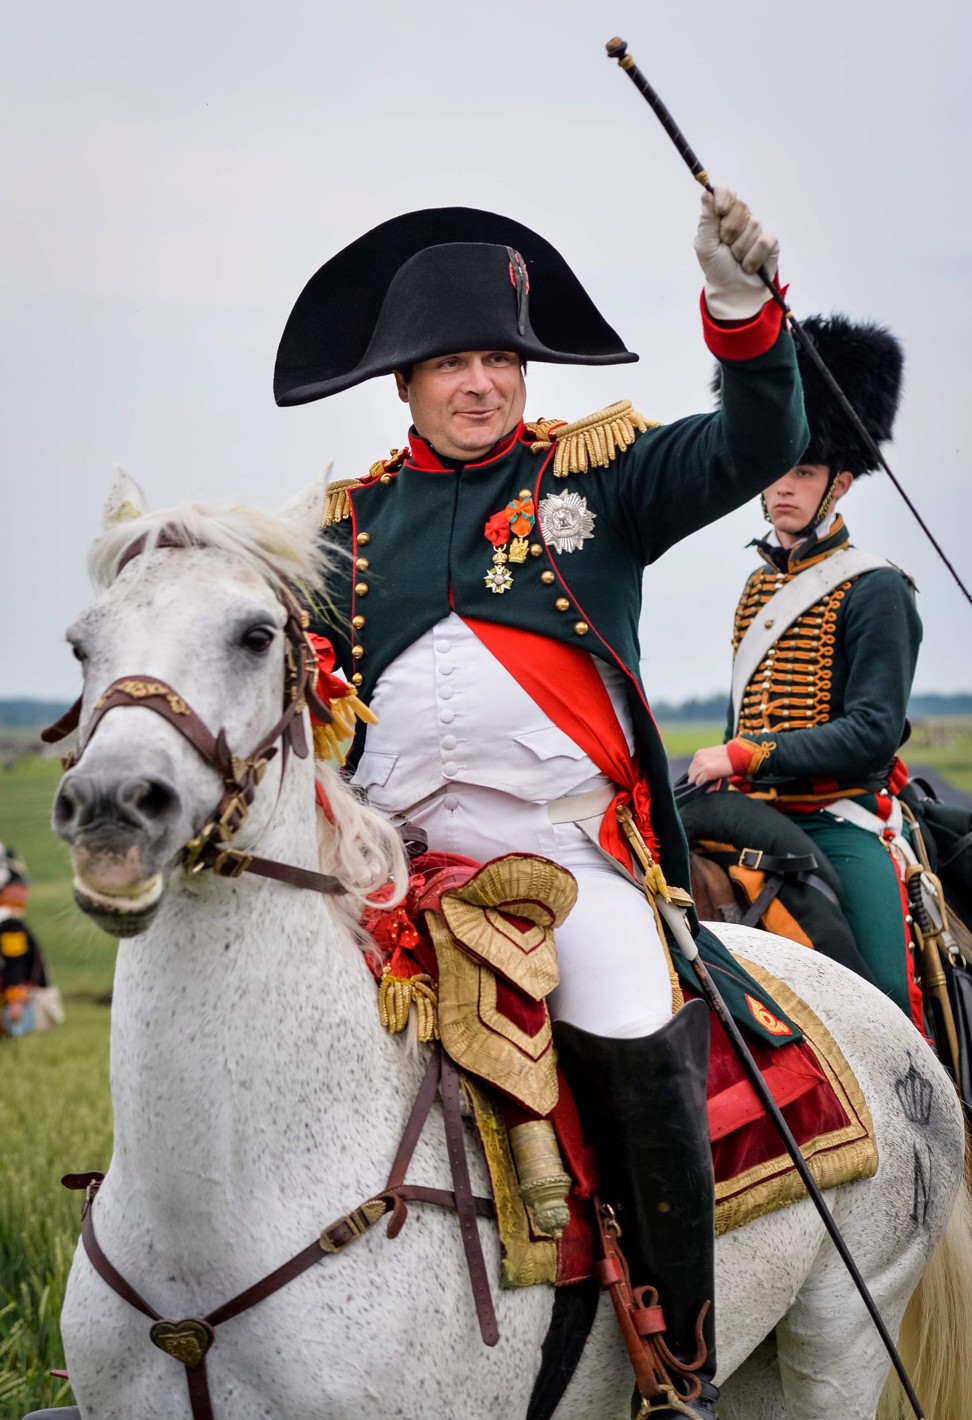 “Napoleon” salutes during a re-enactment of the Battle of Waterloo in Belgium in June 2015, as part of the bicentennial celebrations of the battle. Napoleon’s final defeat was the result of a fatal hesitation by Marshal Grouchy, who stuck to his orders to pursue the Prussian III Corps instead of riding to Waterloo when loud cannon fire heralded the battle’s decisive moment. Photo: EPA